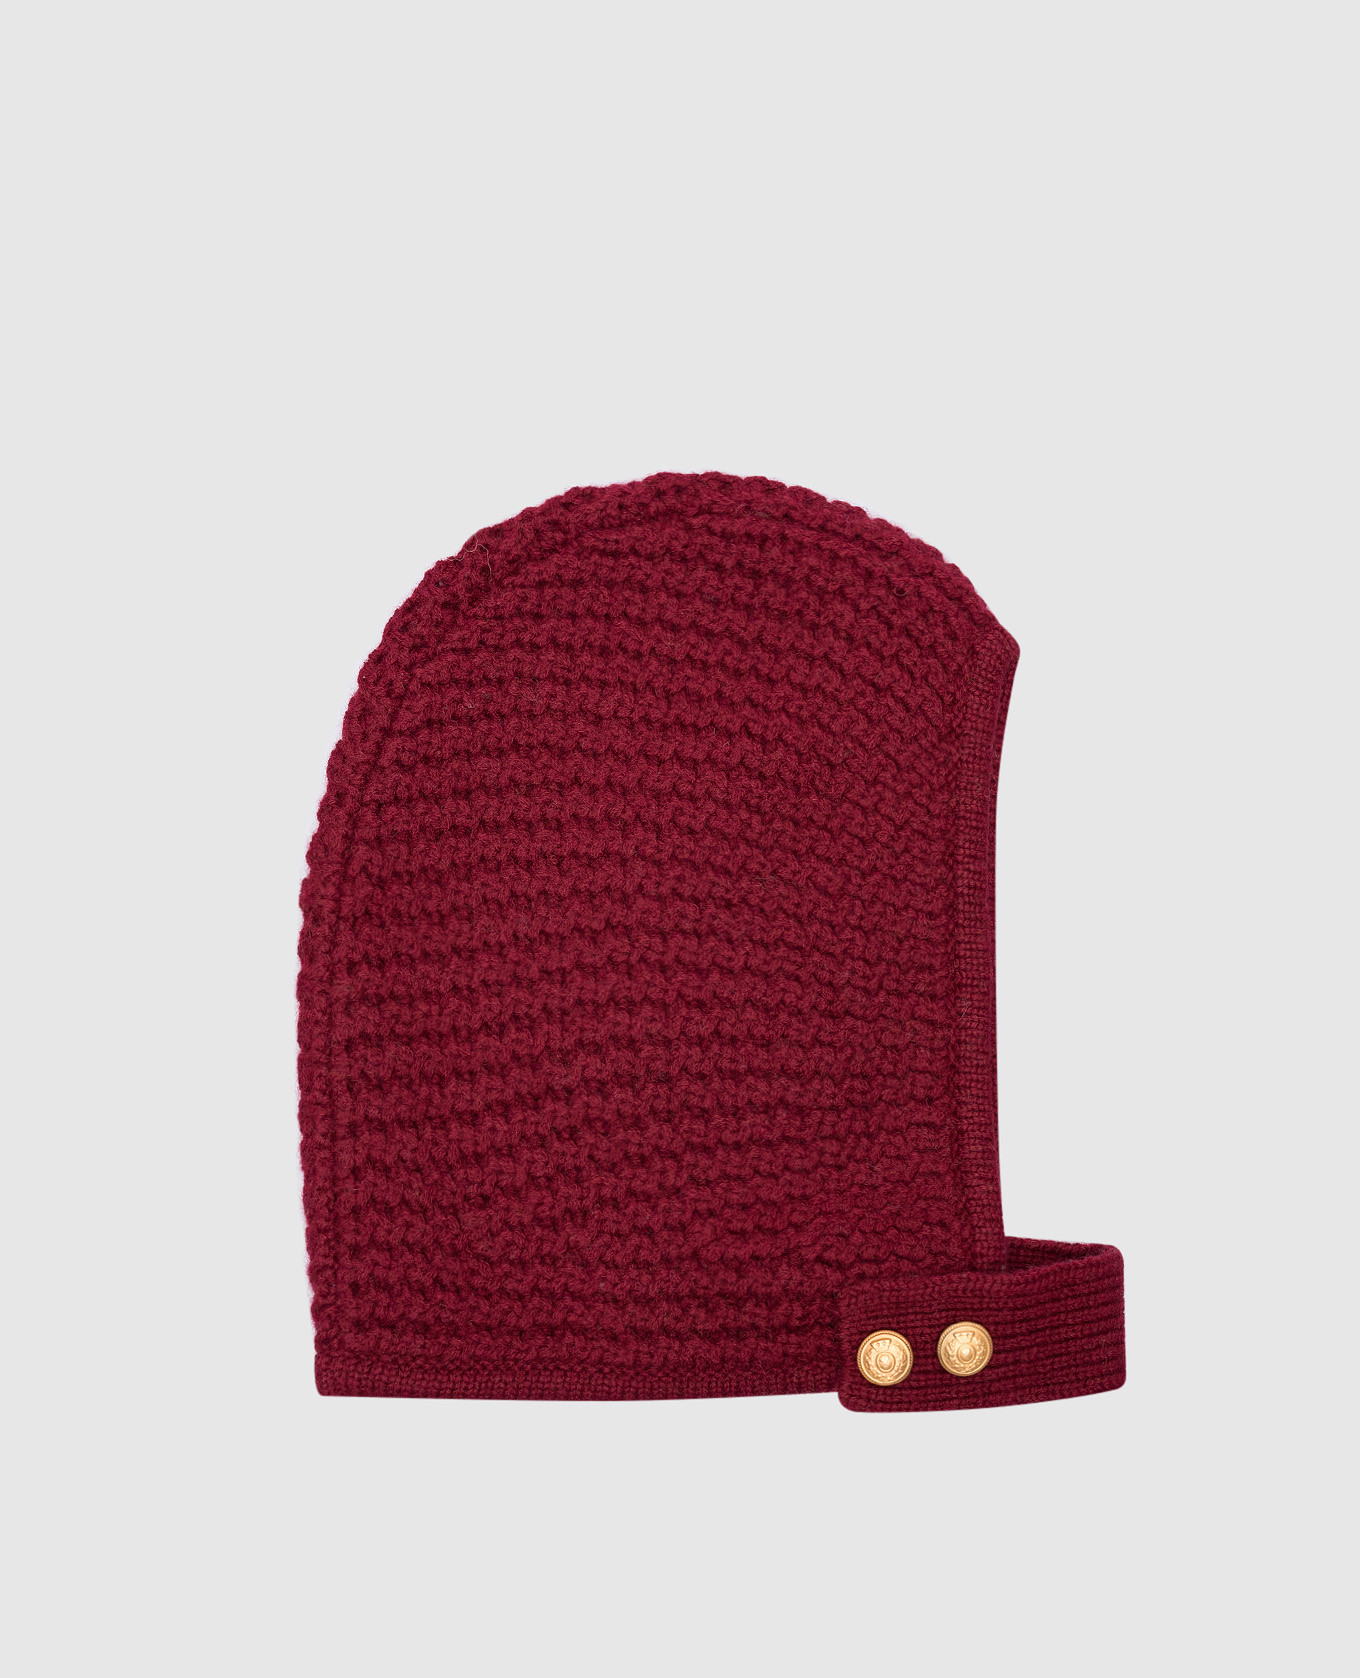 A burgundy hat made of wool